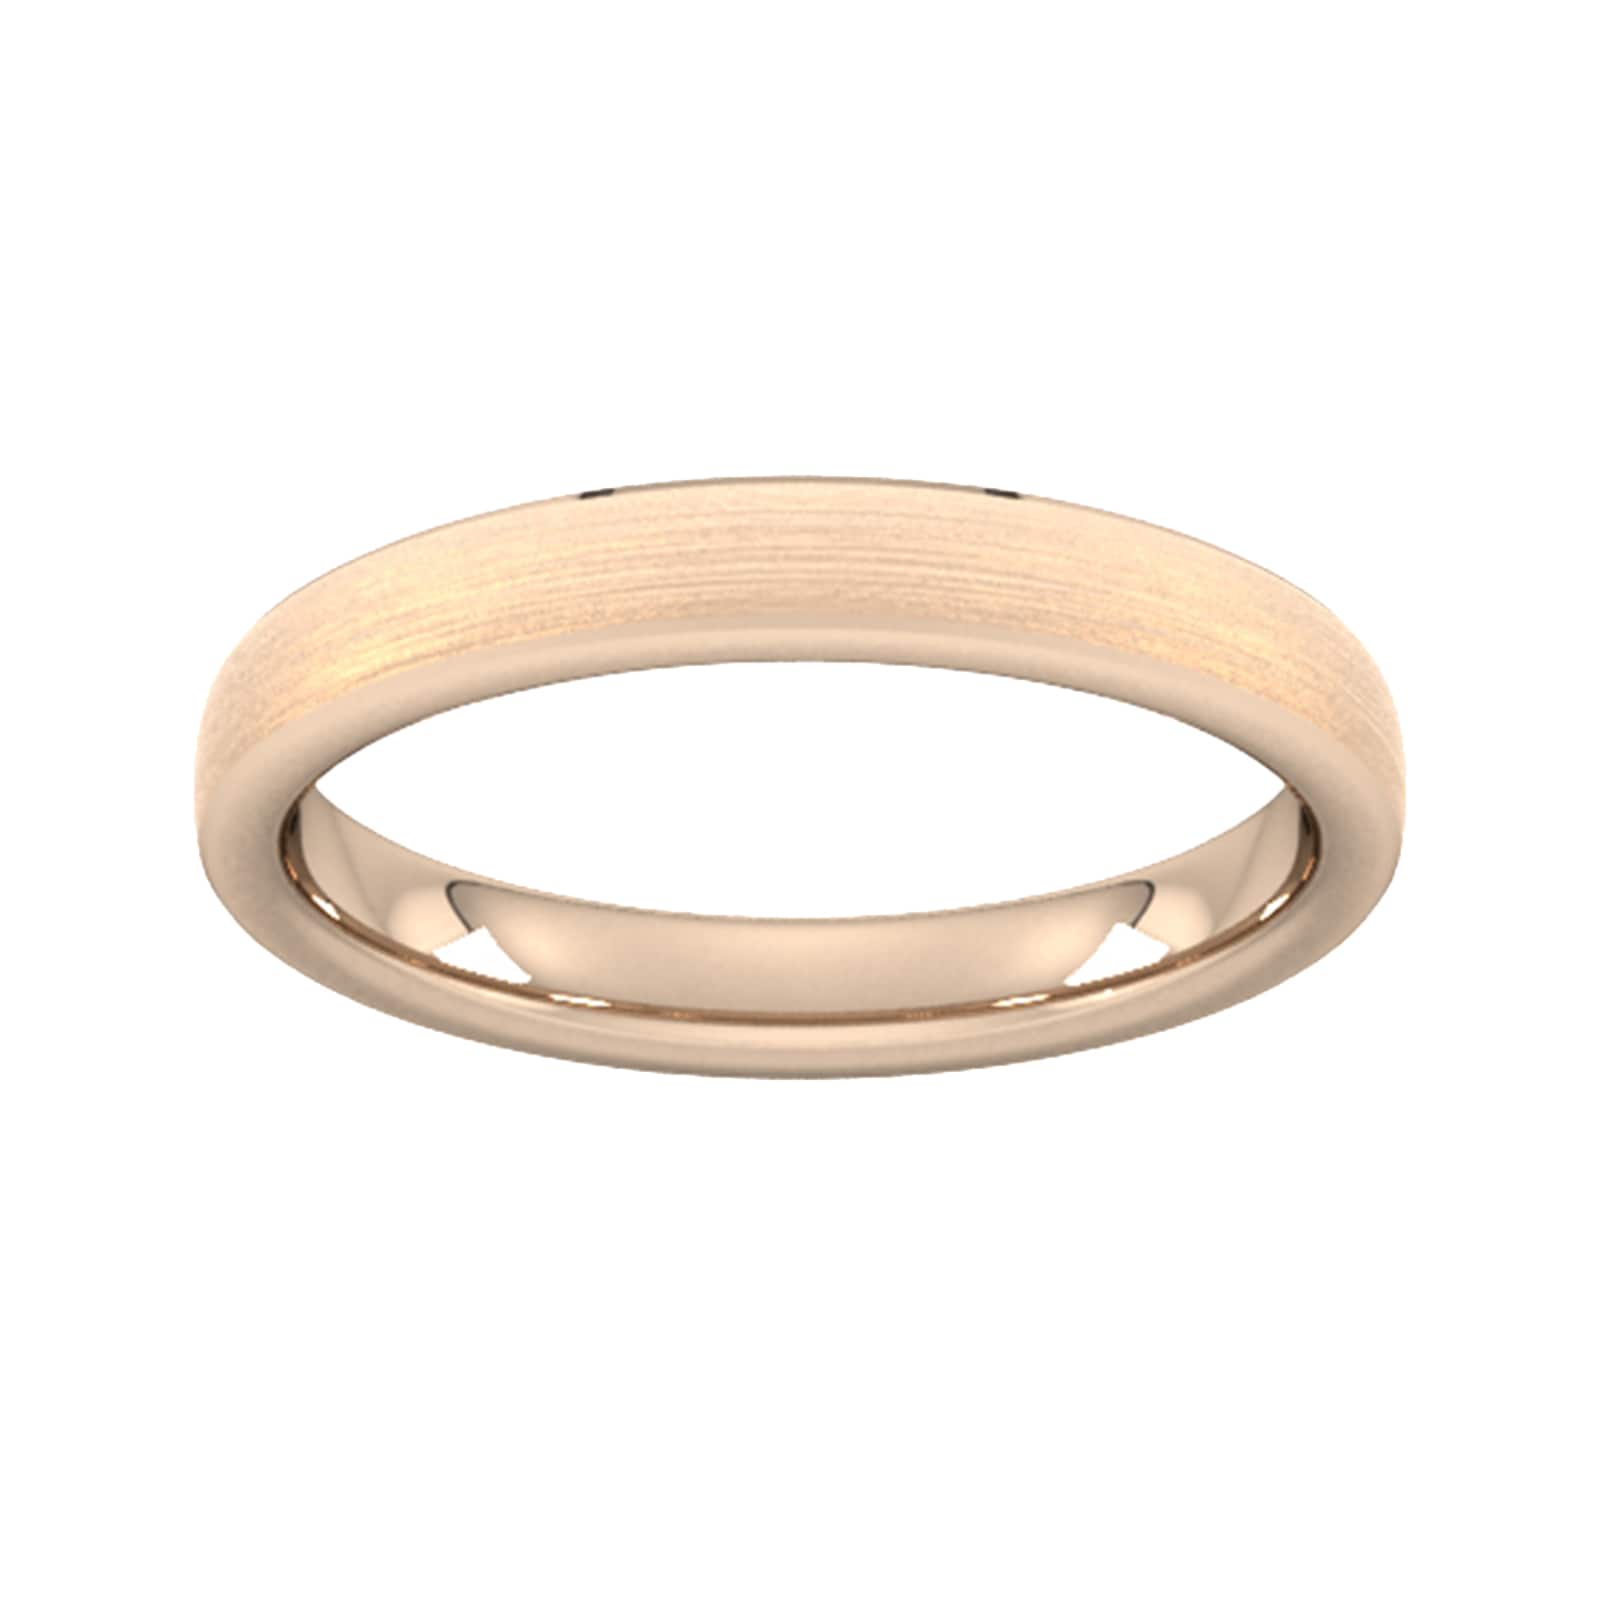 3mm Slight Court Heavy Polished Chamfered Edges With Matt Centre Wedding Ring In 18 Carat Rose Gold - Ring Size R